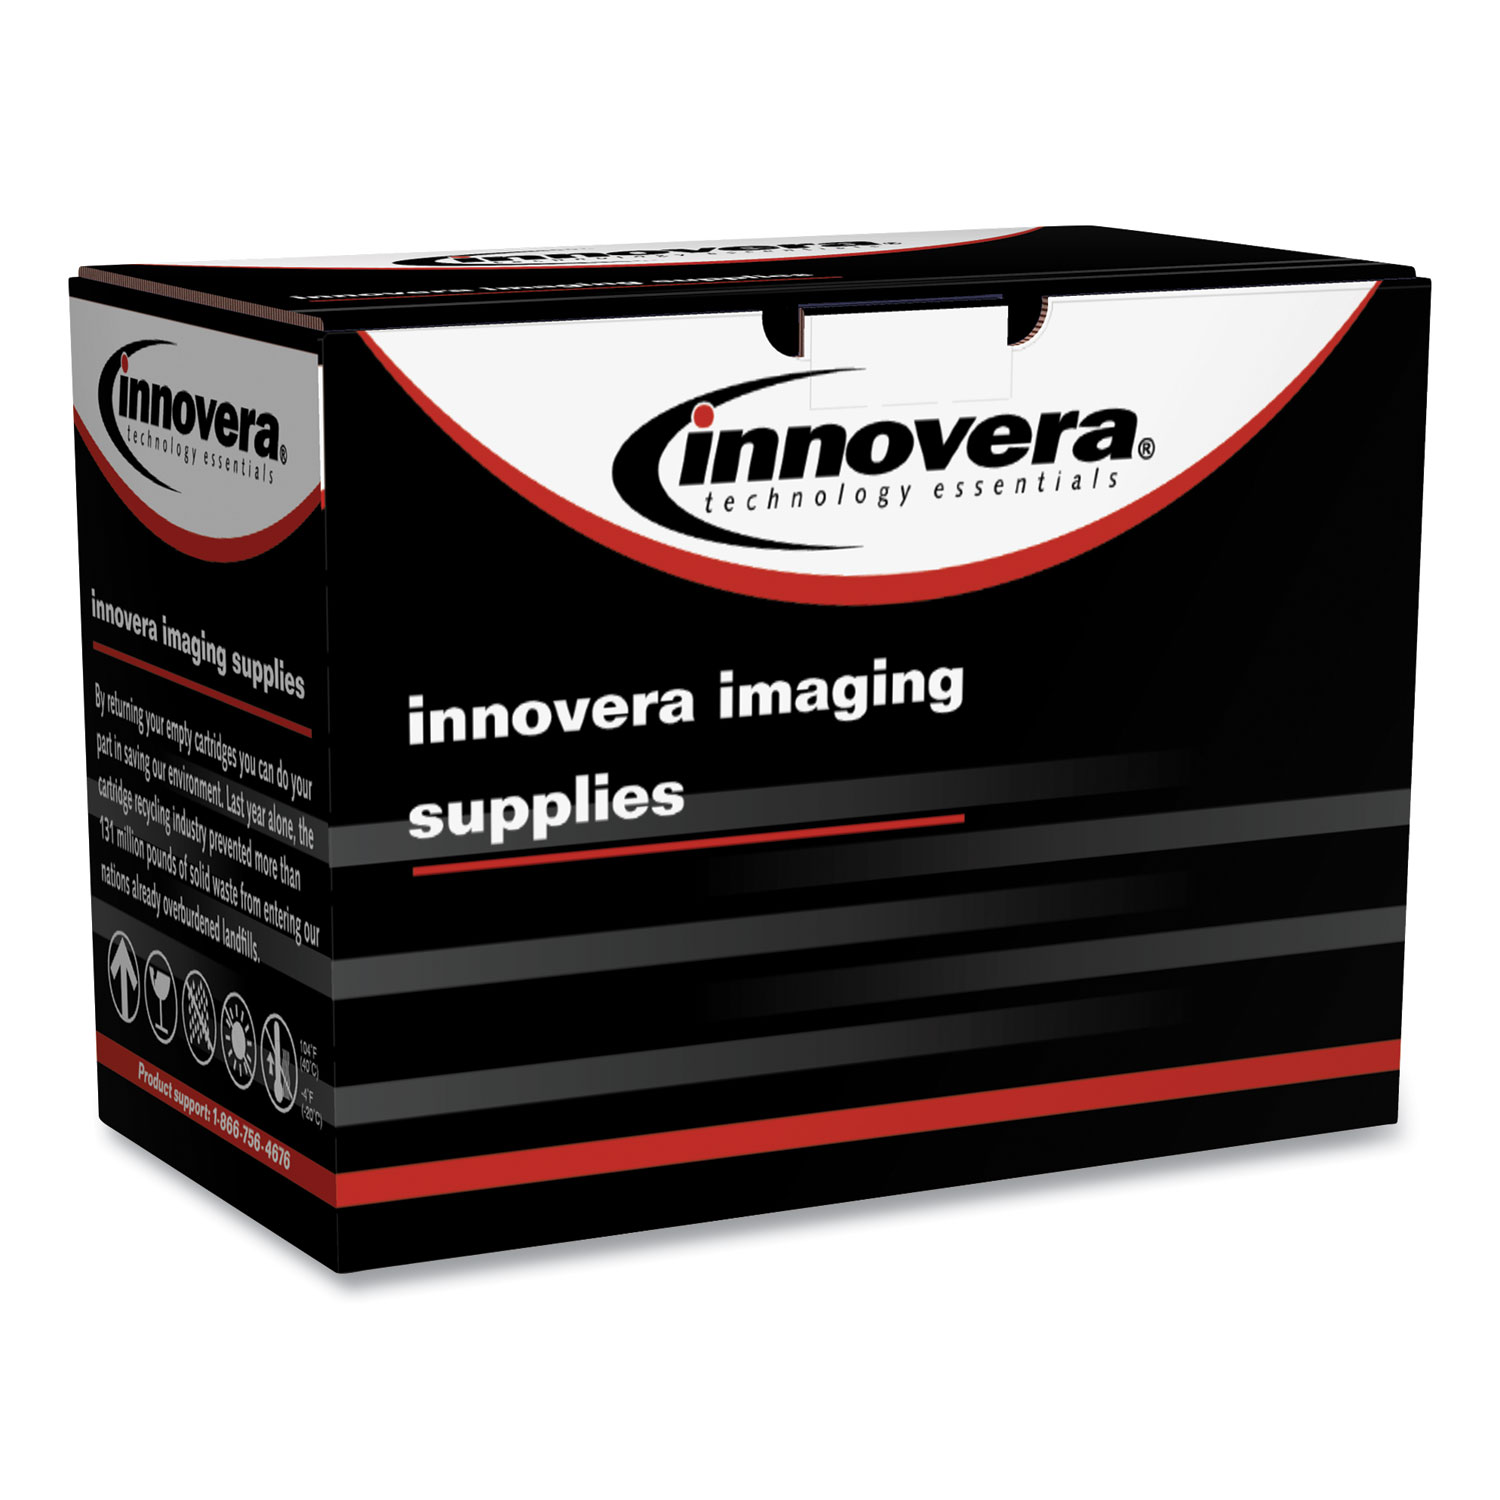  Innovera IVR013R00662 Remanufactured Black Drum Unit, Replacement for Xerox 7525 (013R00662), 125,000 Page-Yield (IVR013R00662) 